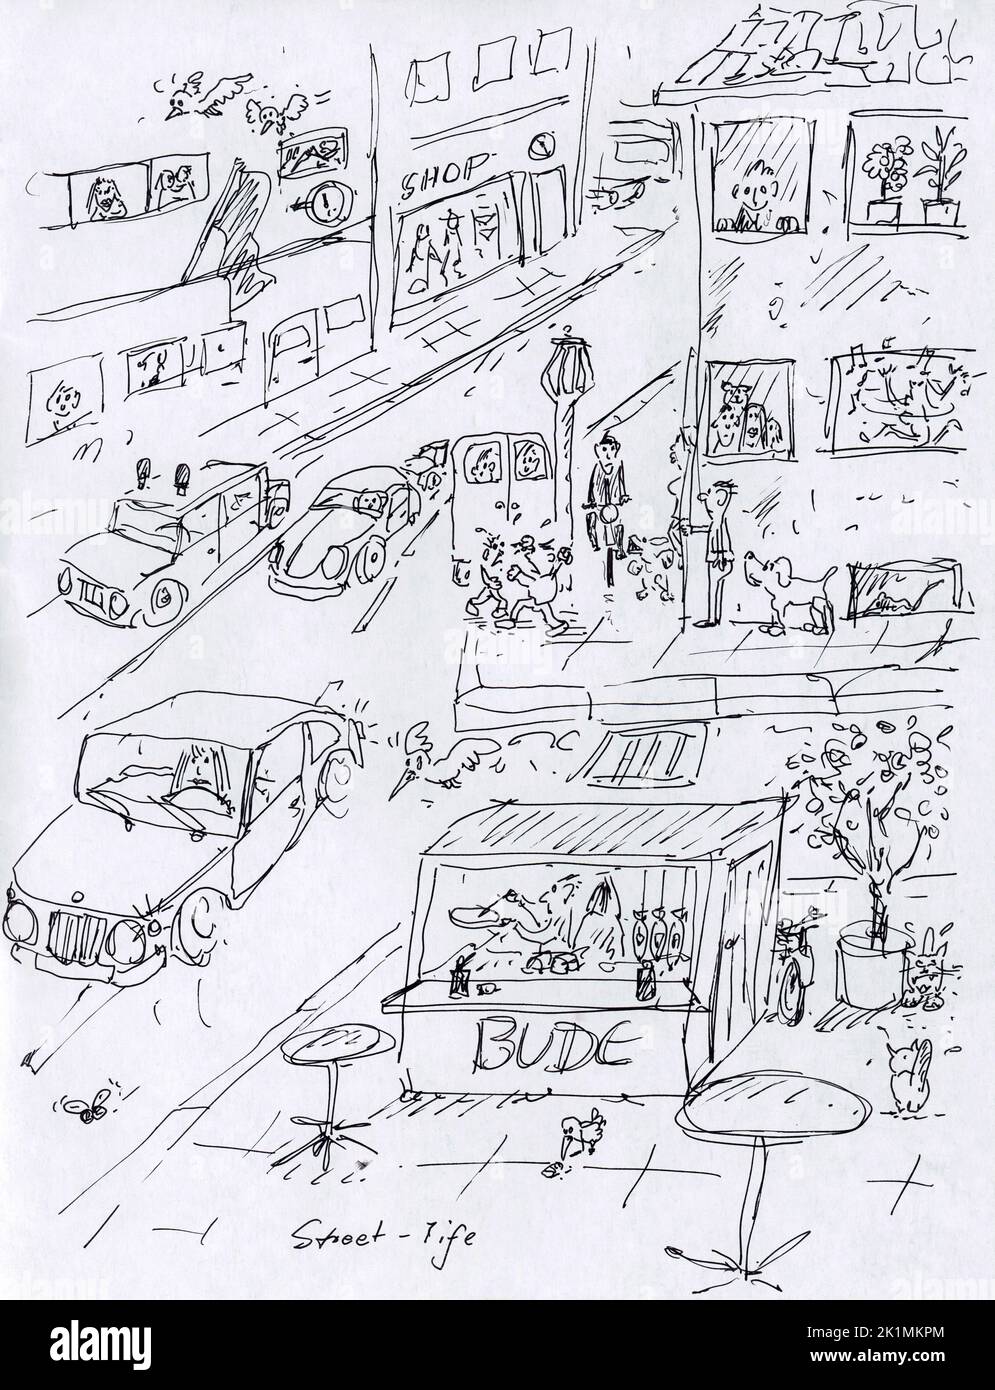 Pen drawing called 'Street life'. A street with cars, houses, shops, people and animals. There is happening a lot on this street. Stock Photo